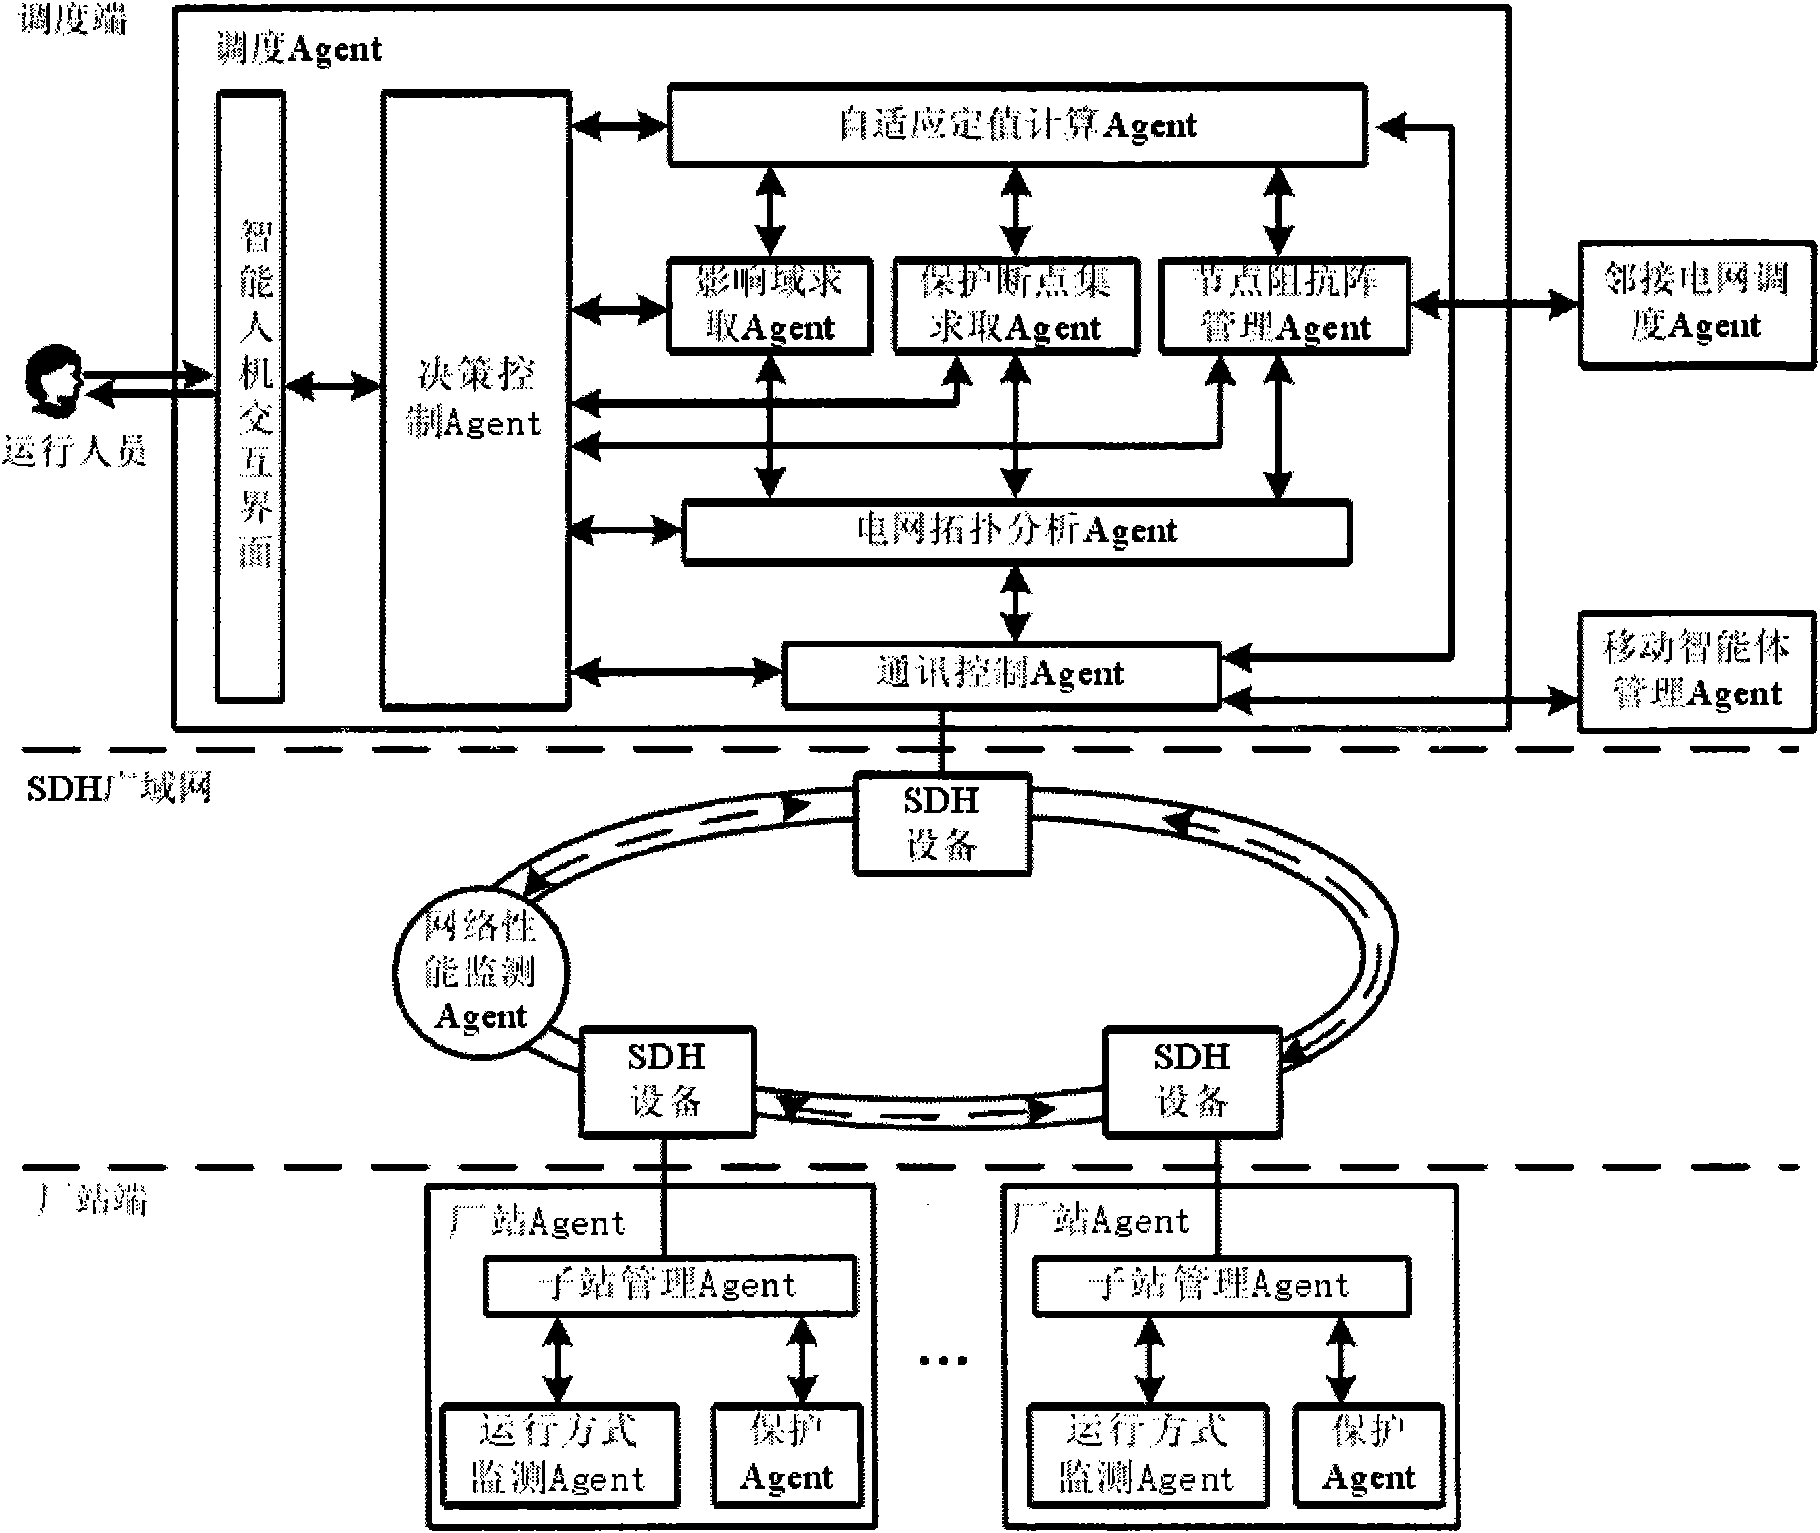 Self-adaptive intelligent coordination protection and control system for power grids based on WANs (Wide Area Network) and multiple agents